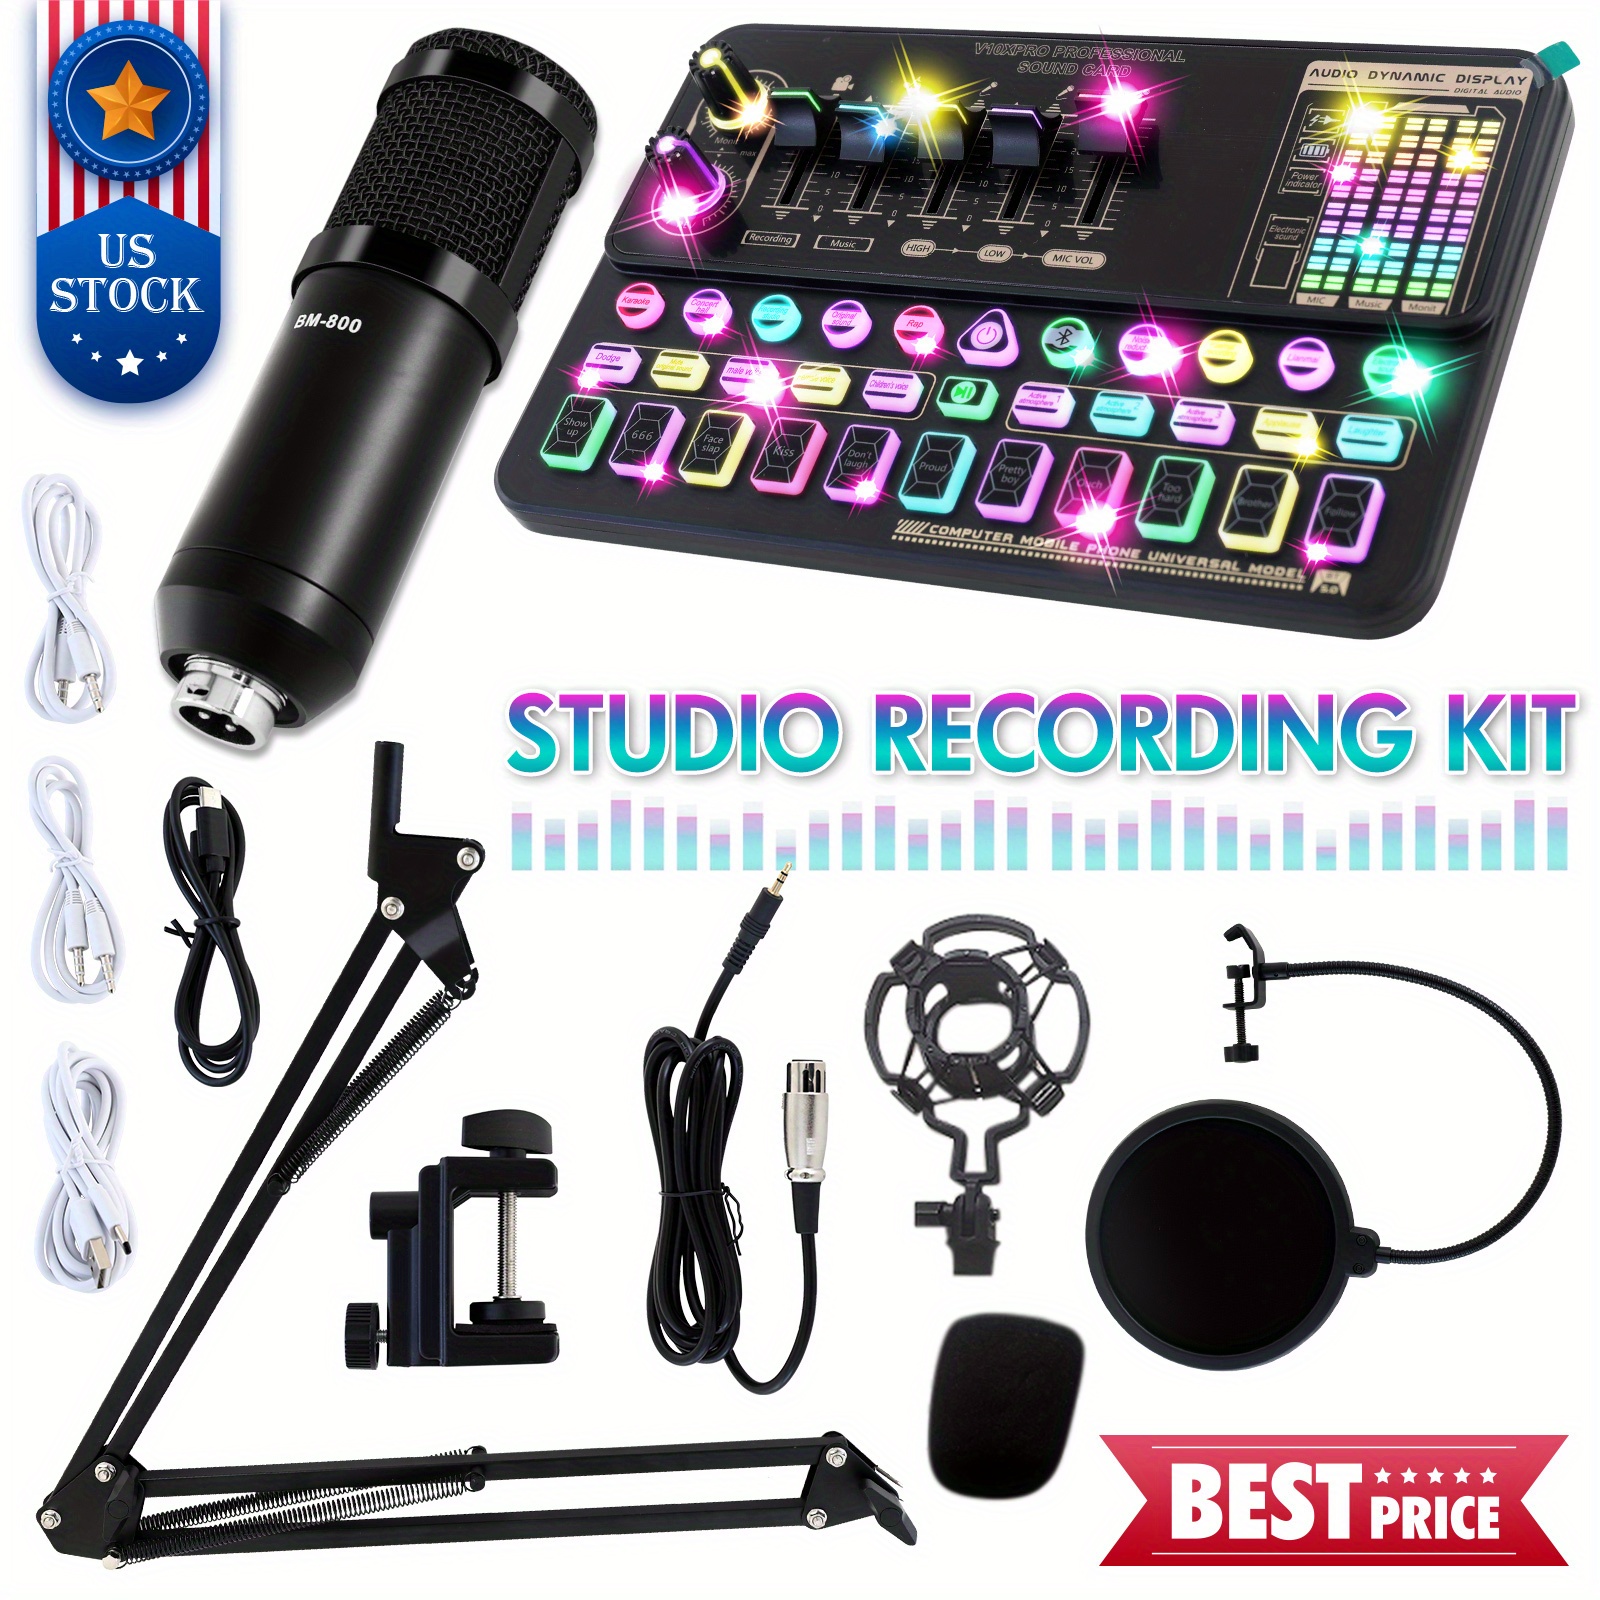 

Bundle Bm-800 Streaming Equipment Mic Kit With Vx10 Pro Live Sound Card, Adjustable Mic Stand And Metal Shock Mount Podcast Microphone Kit For Recording Broadcasting Streaming